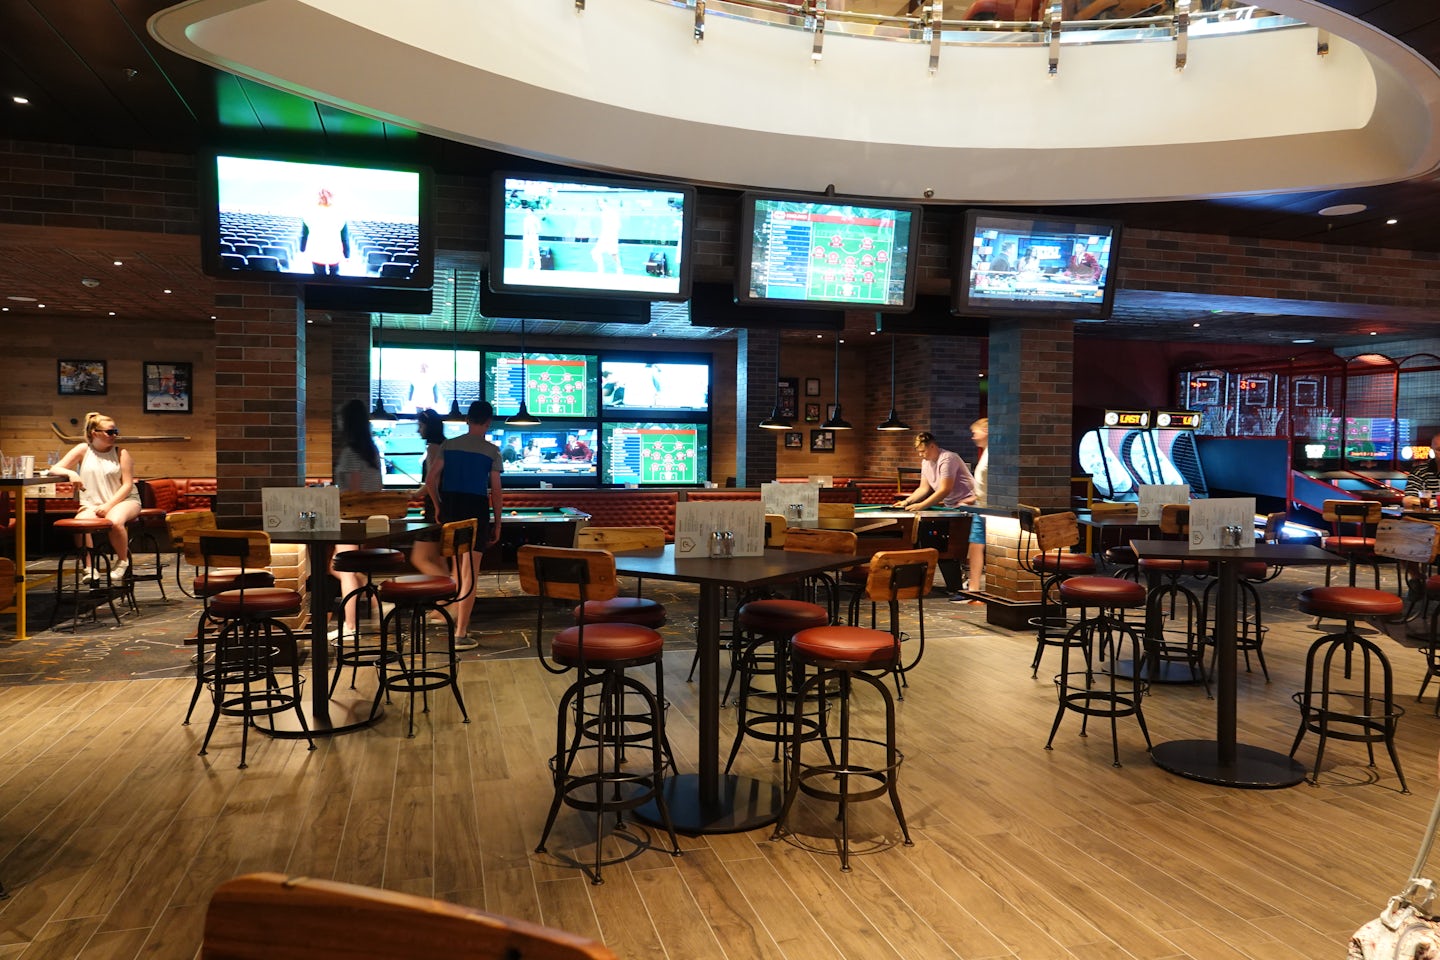 The sports bar has taken away a lot of seating and food you have to pay for